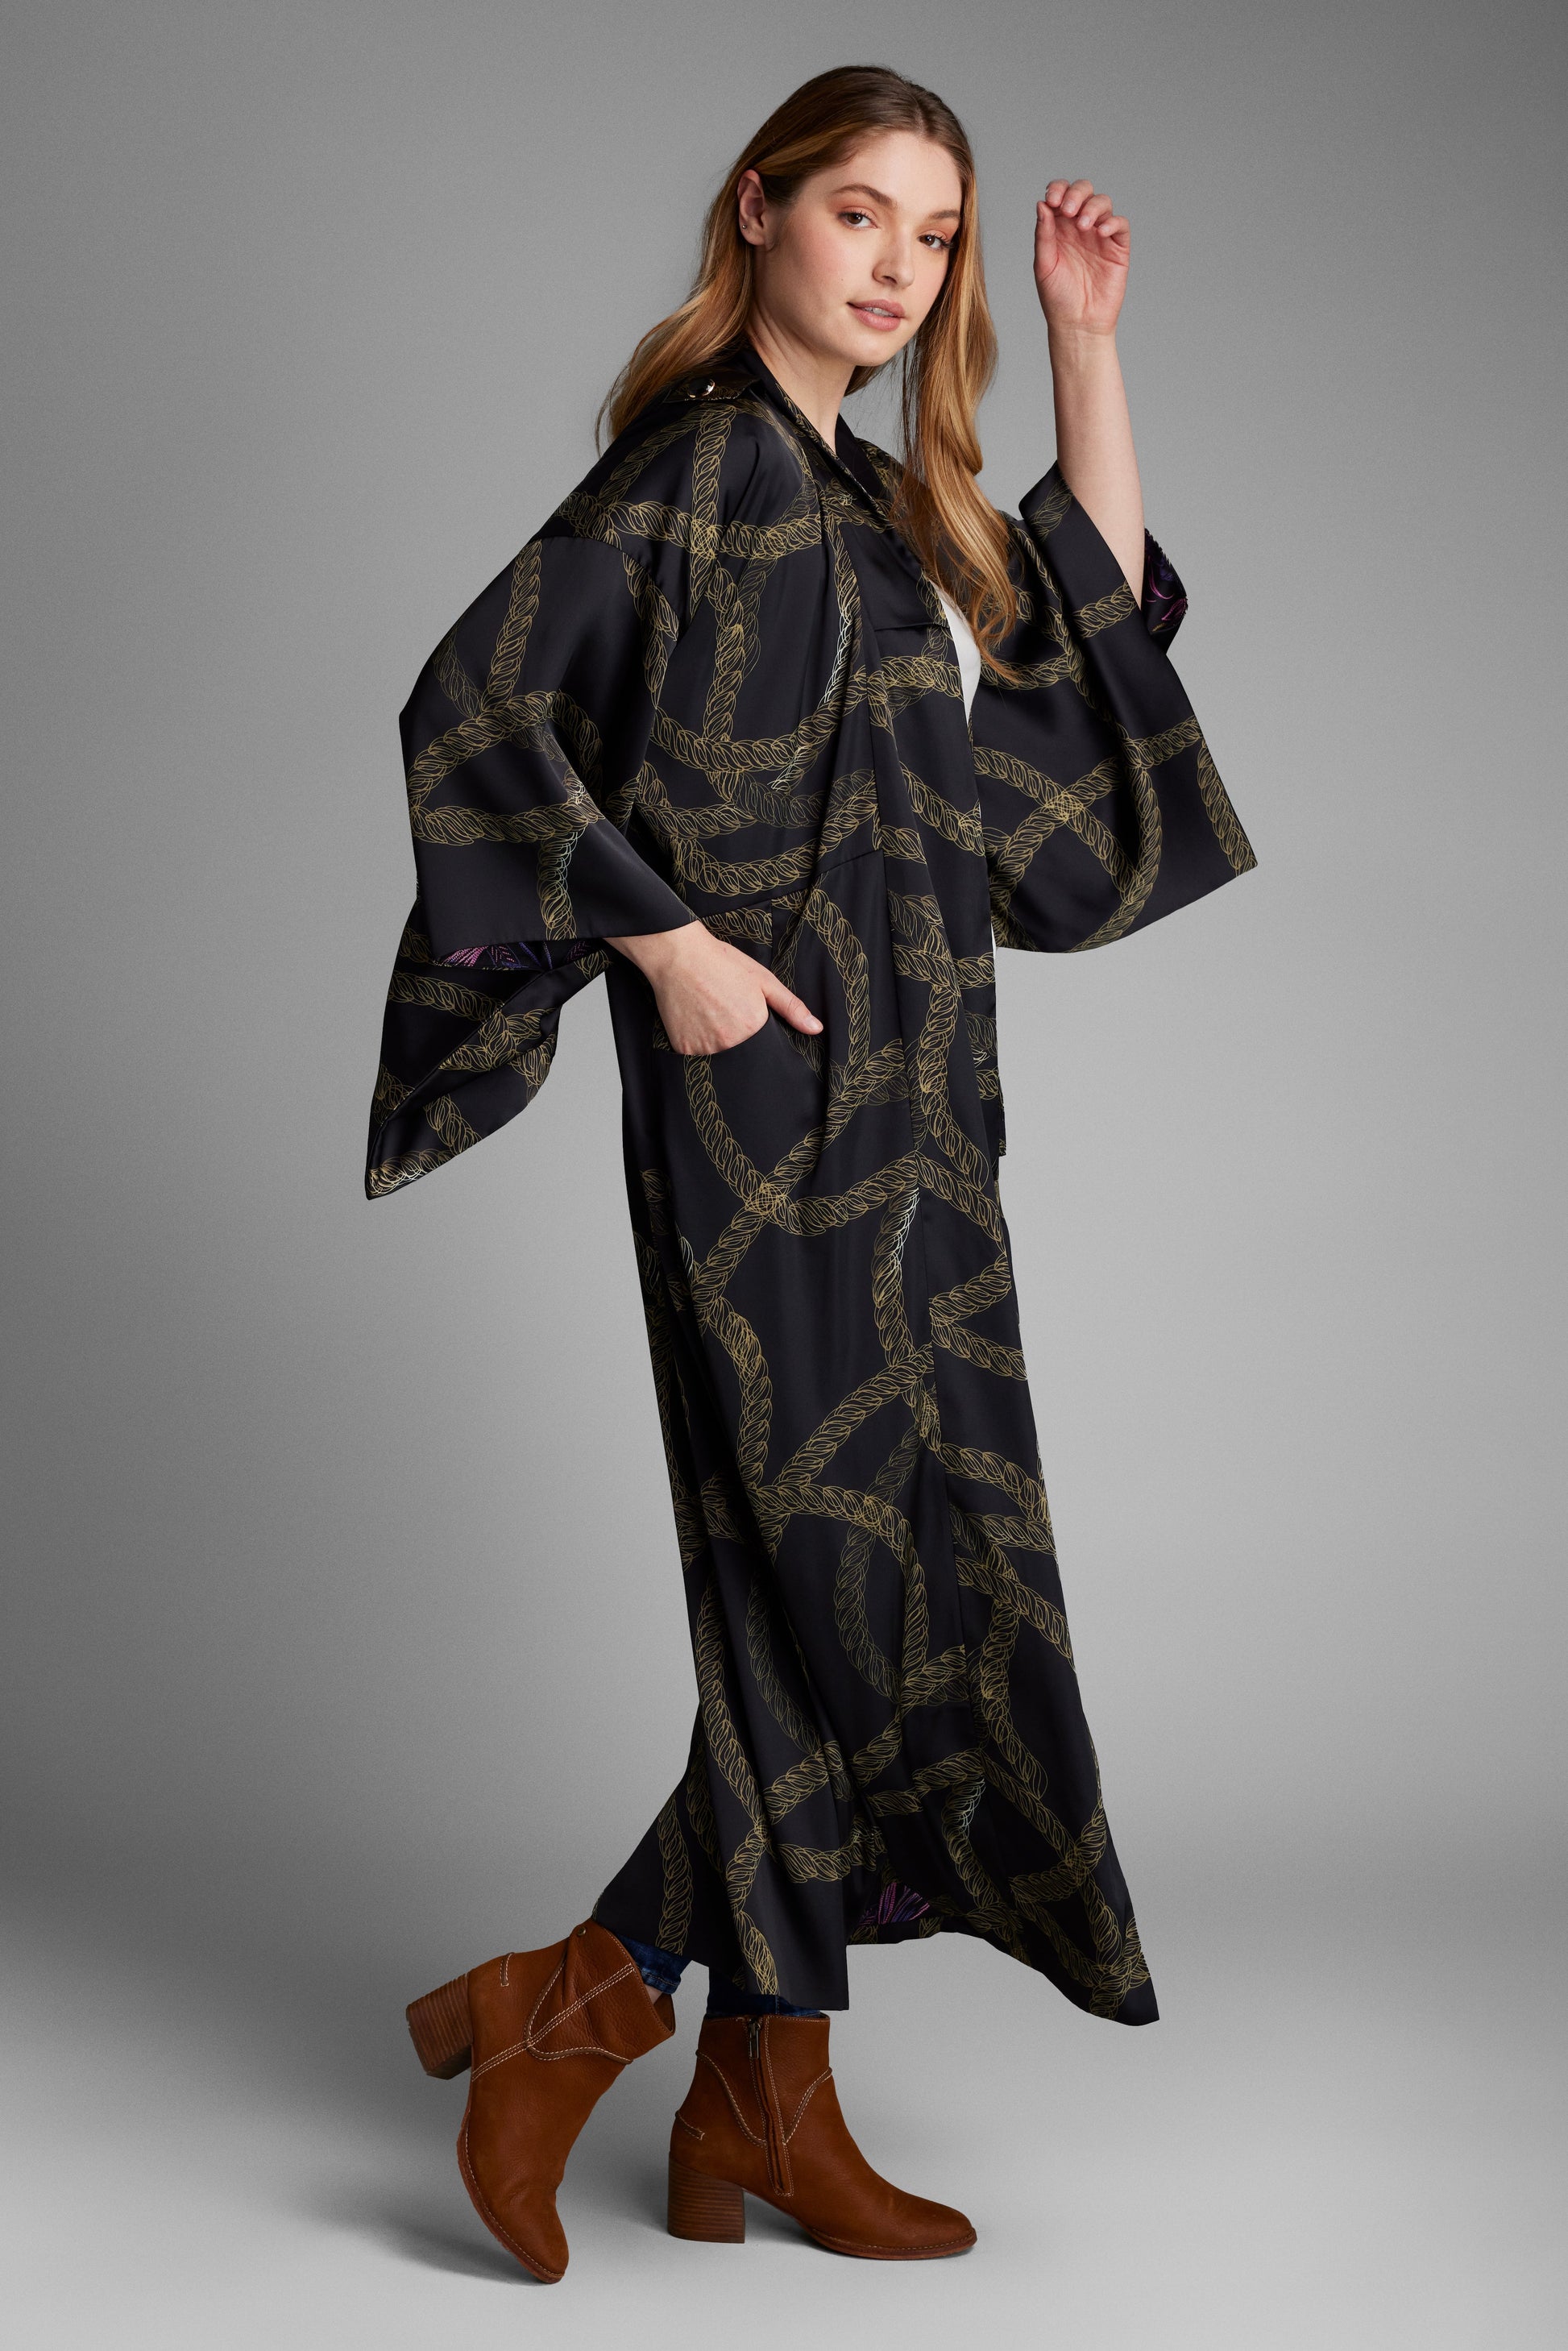 Women modelling a black and gold colored chain print kimono duster that has been made from recycled textiles